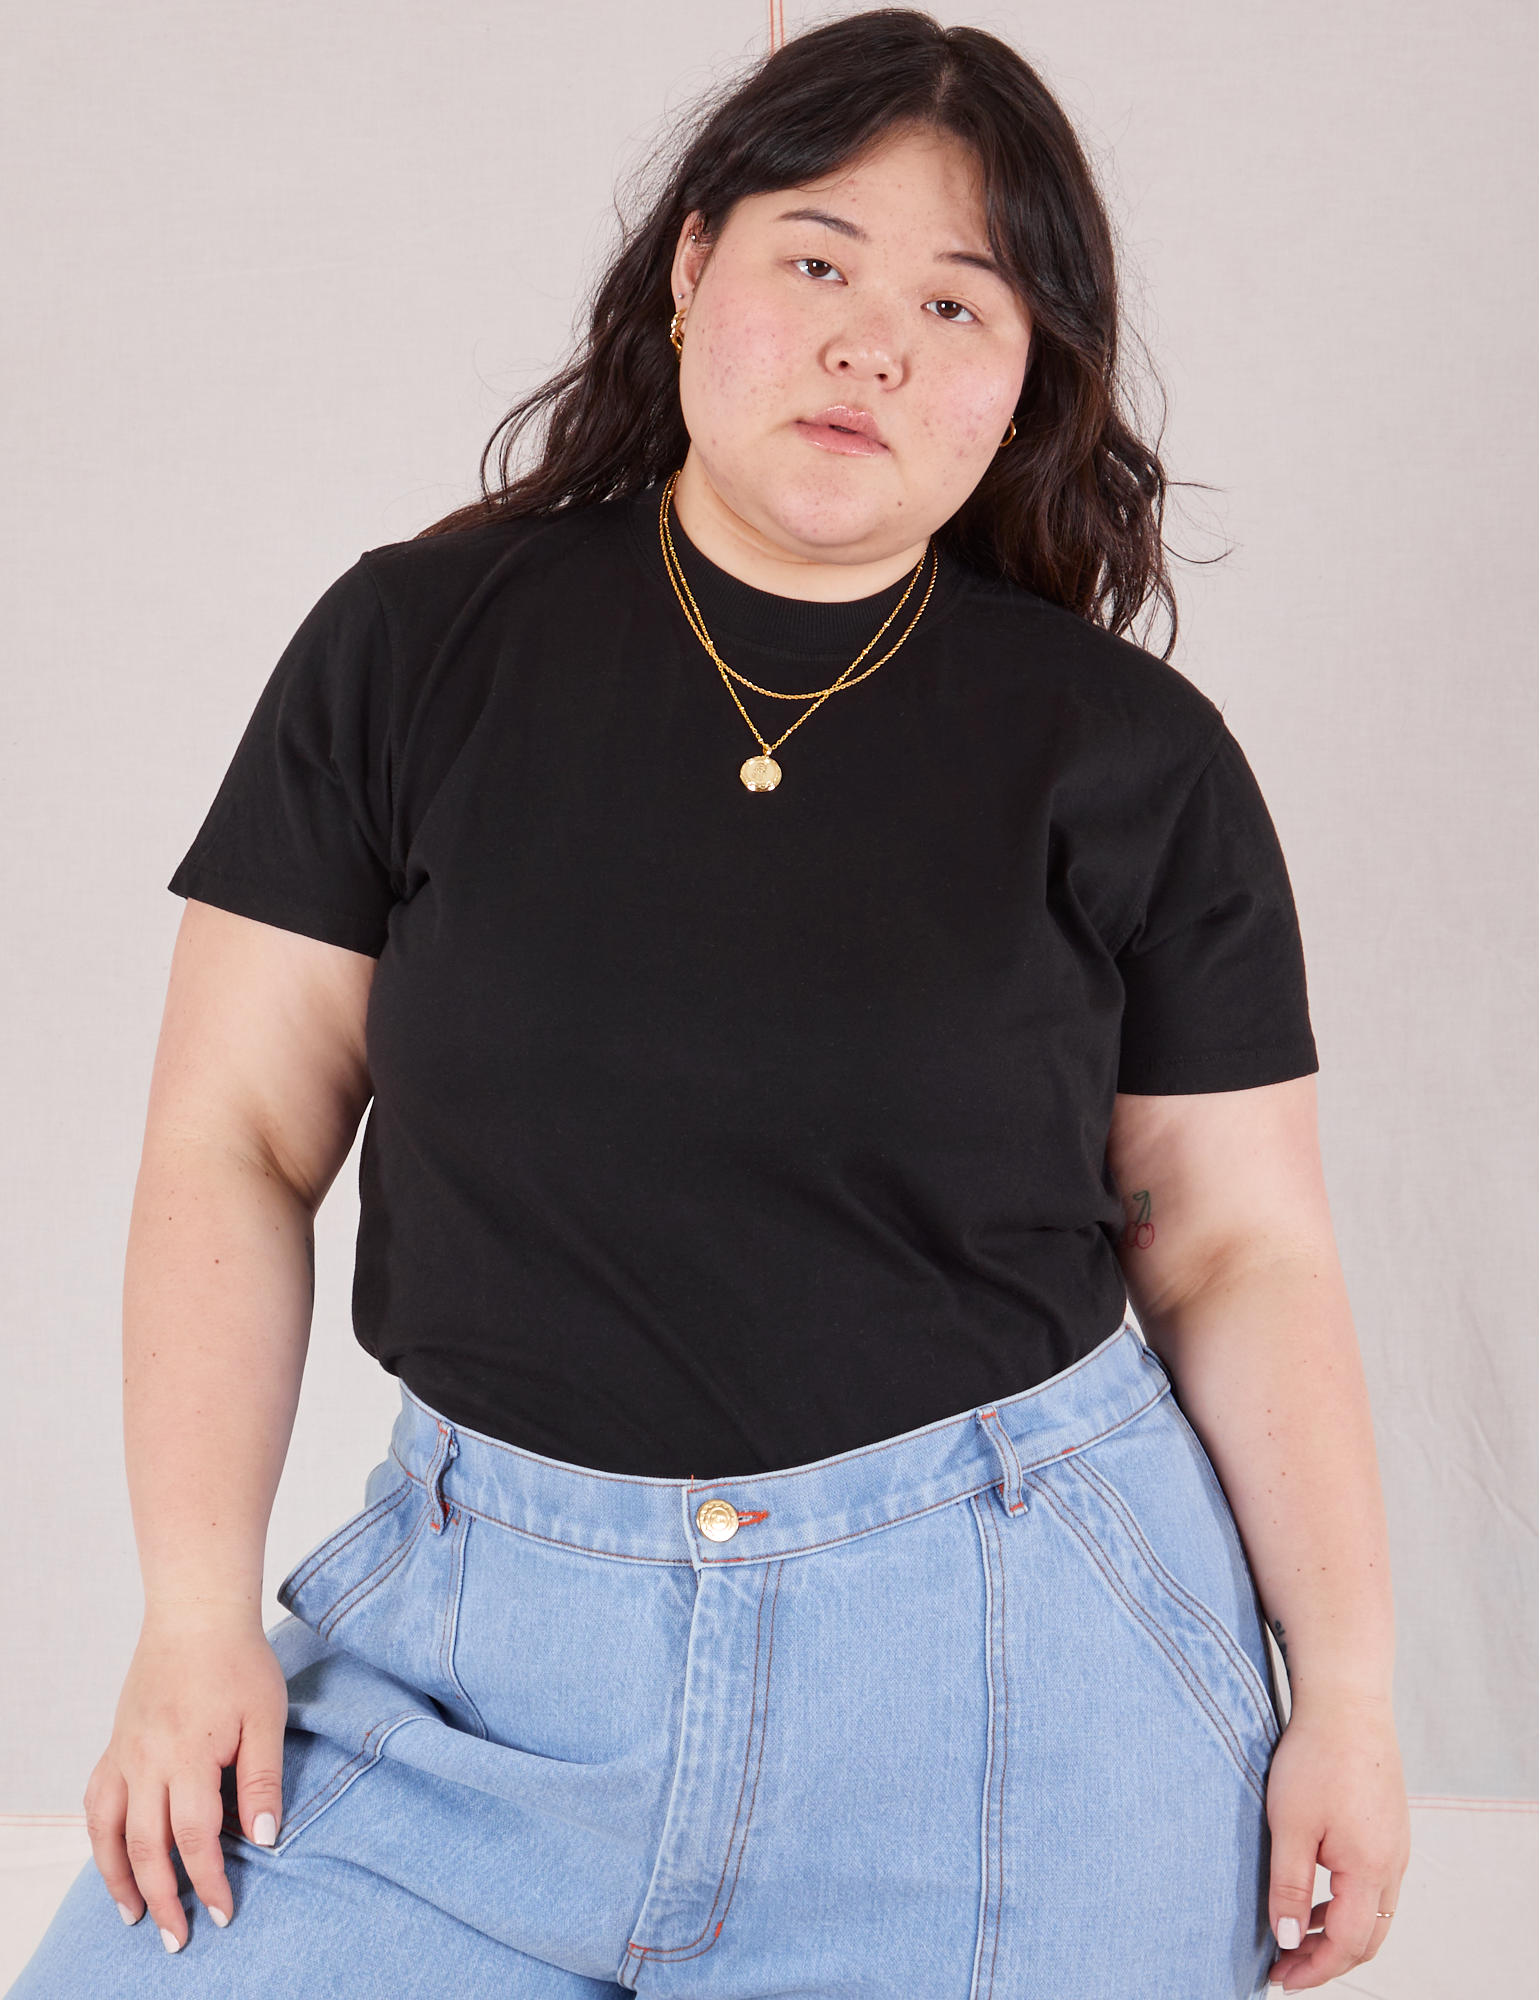 Ashley is 5&#39;7&quot; and wearing L Organic Vintage Tee in Basic Black tucked into light wash Carpenter Jeans